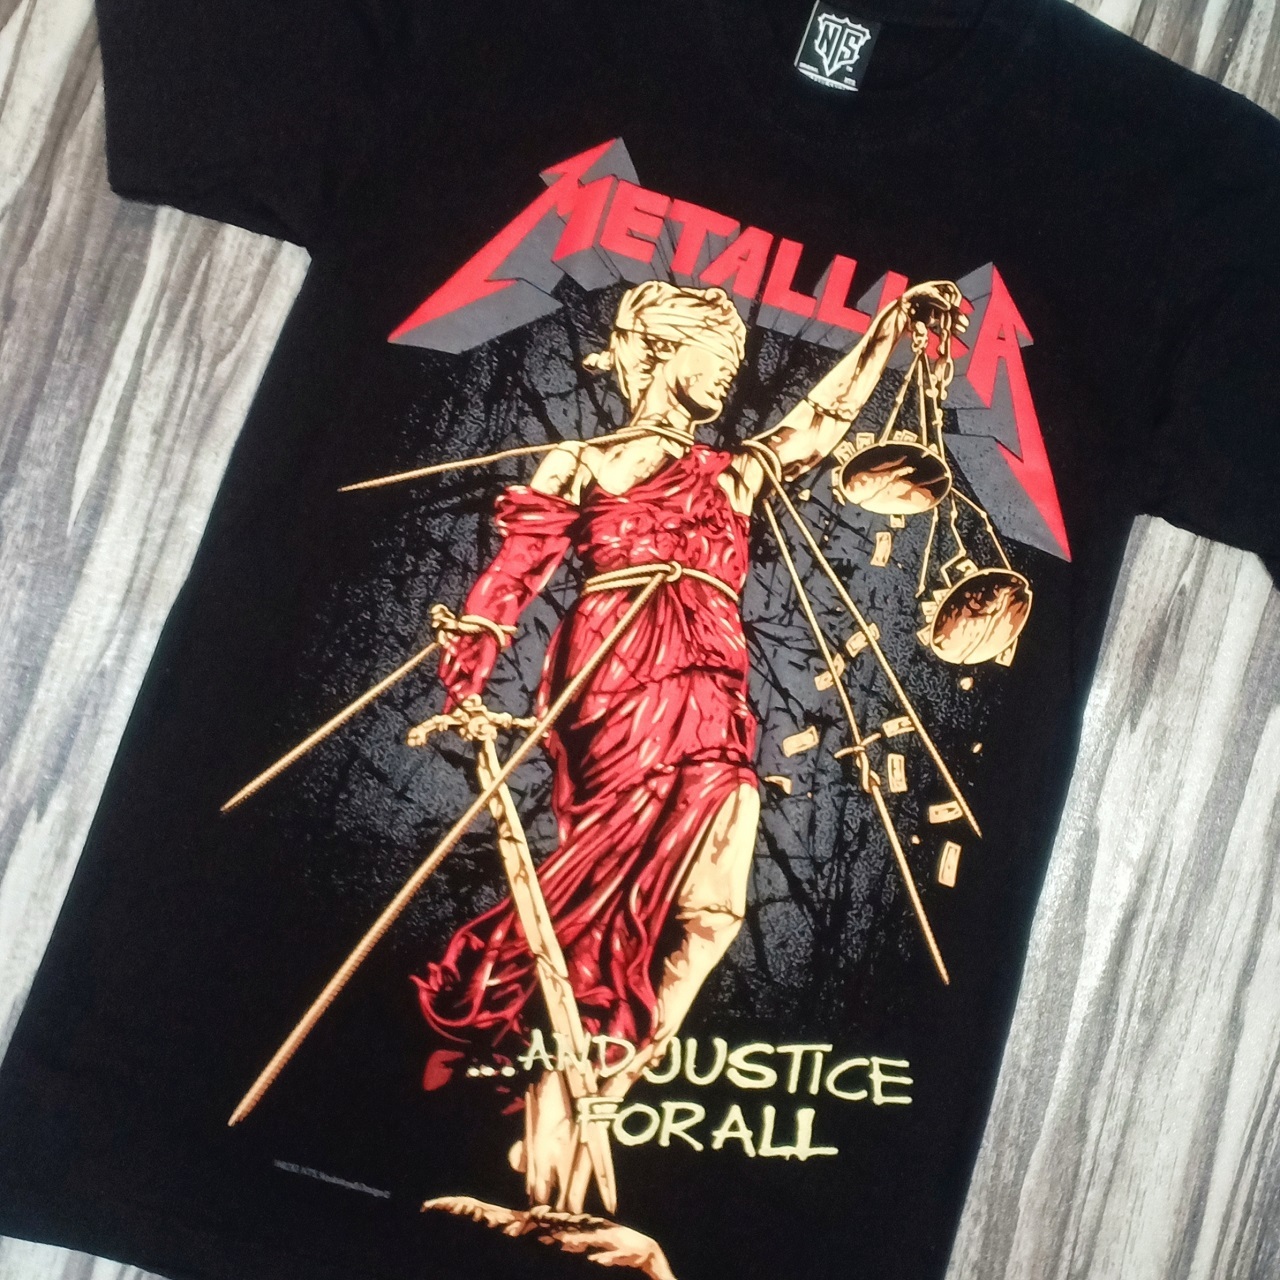 16R283 NTS TSHIRT METALLICA HEAVY METAL ROCK BAND JUSTICE FOR ALL ALBUM  COVER NEW TYPE SYSTEM COTTON T-SHIRT – PREMIUM GRADE BLACK TIMBER NEW TYPE  SYSTEM MOAI SPEED HIGH QUALITY SILK SCREEN